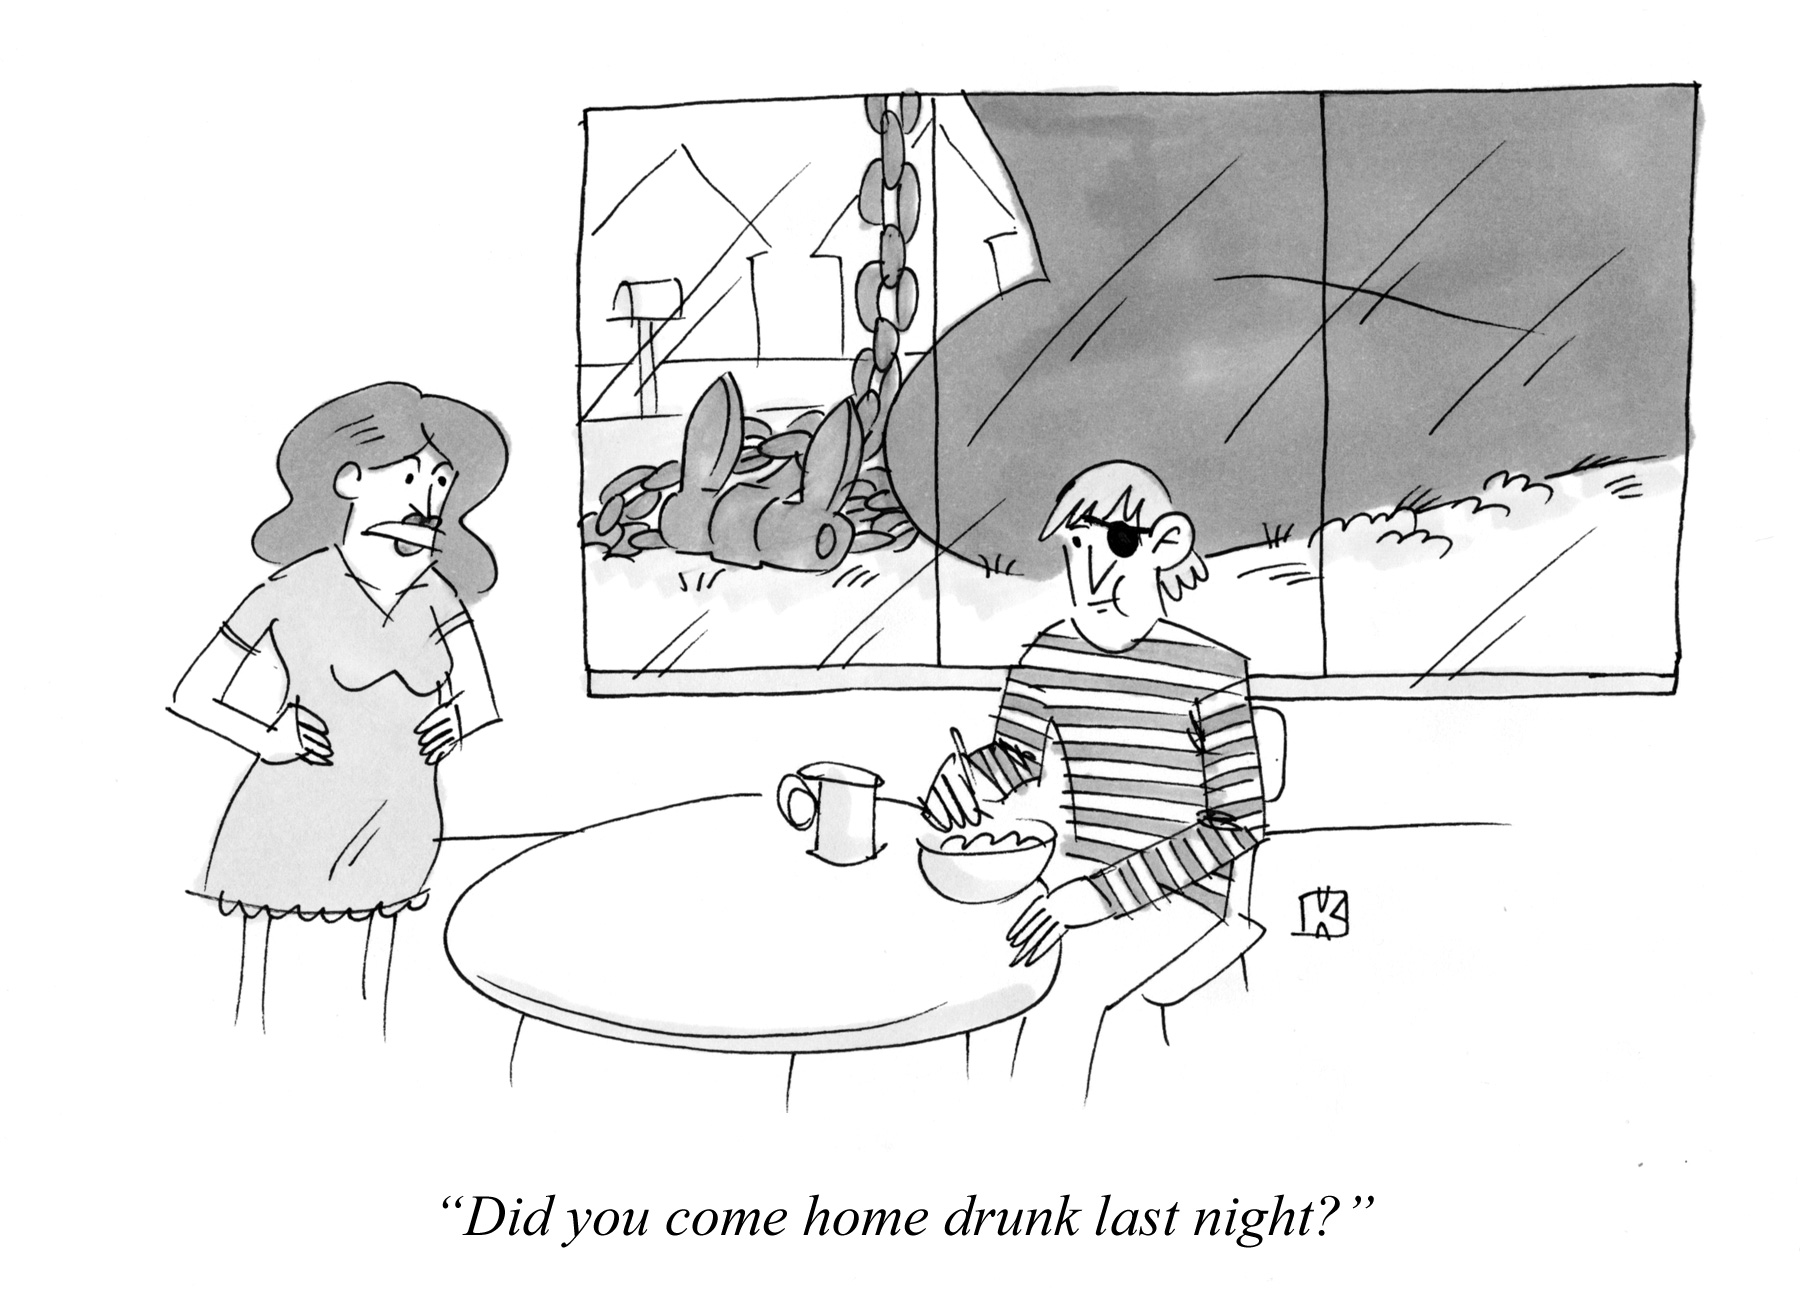 Cartoon about a sailor coming home drunk